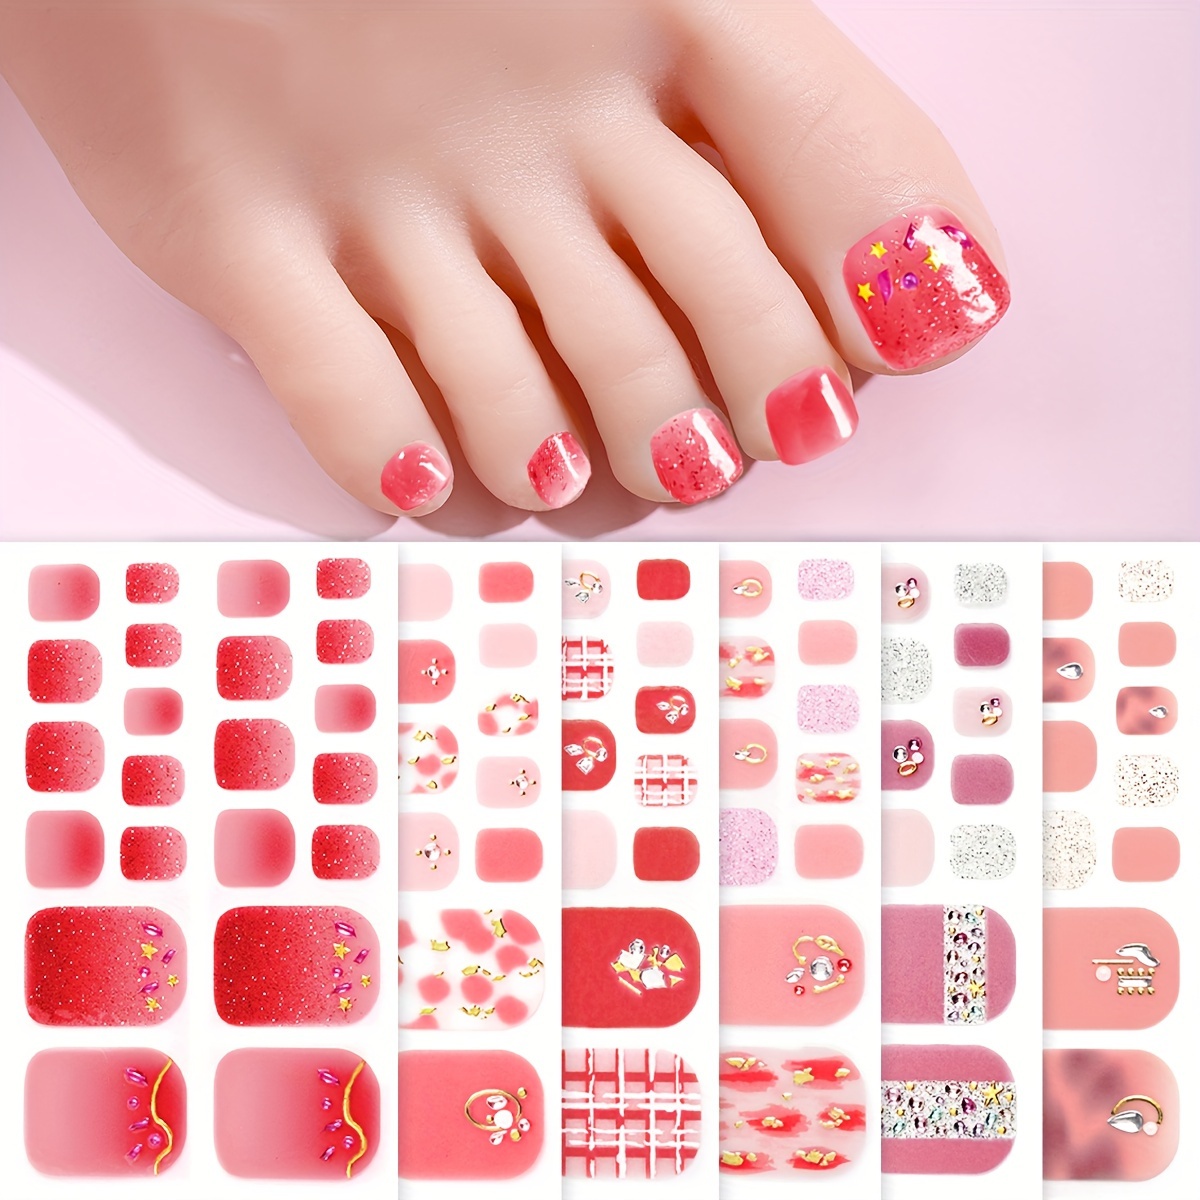 

6-piece Spring Pink 3d Toe Nail Strips - Luxury Gemstone & Glitter Designs, Self-adhesive Wraps With 2 Nail Files For Easy Diy Manicure, Perfect For Women And Girls